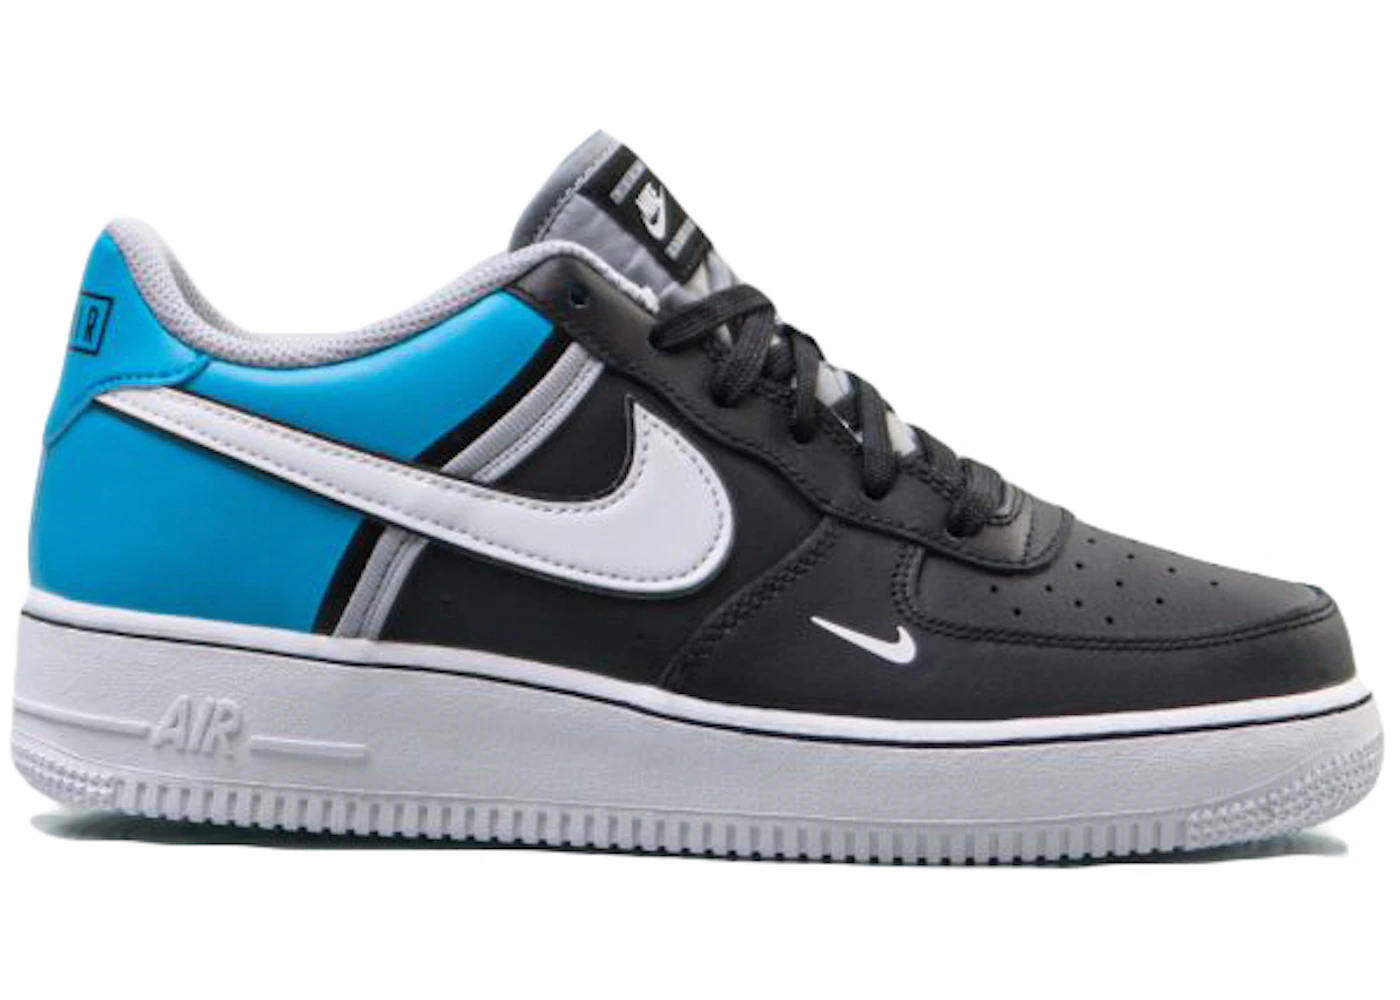 Archeology Embankment Hare Nike Air Force 1 LV8 2 Light Blue Current (GS) - CI1756-001 - US